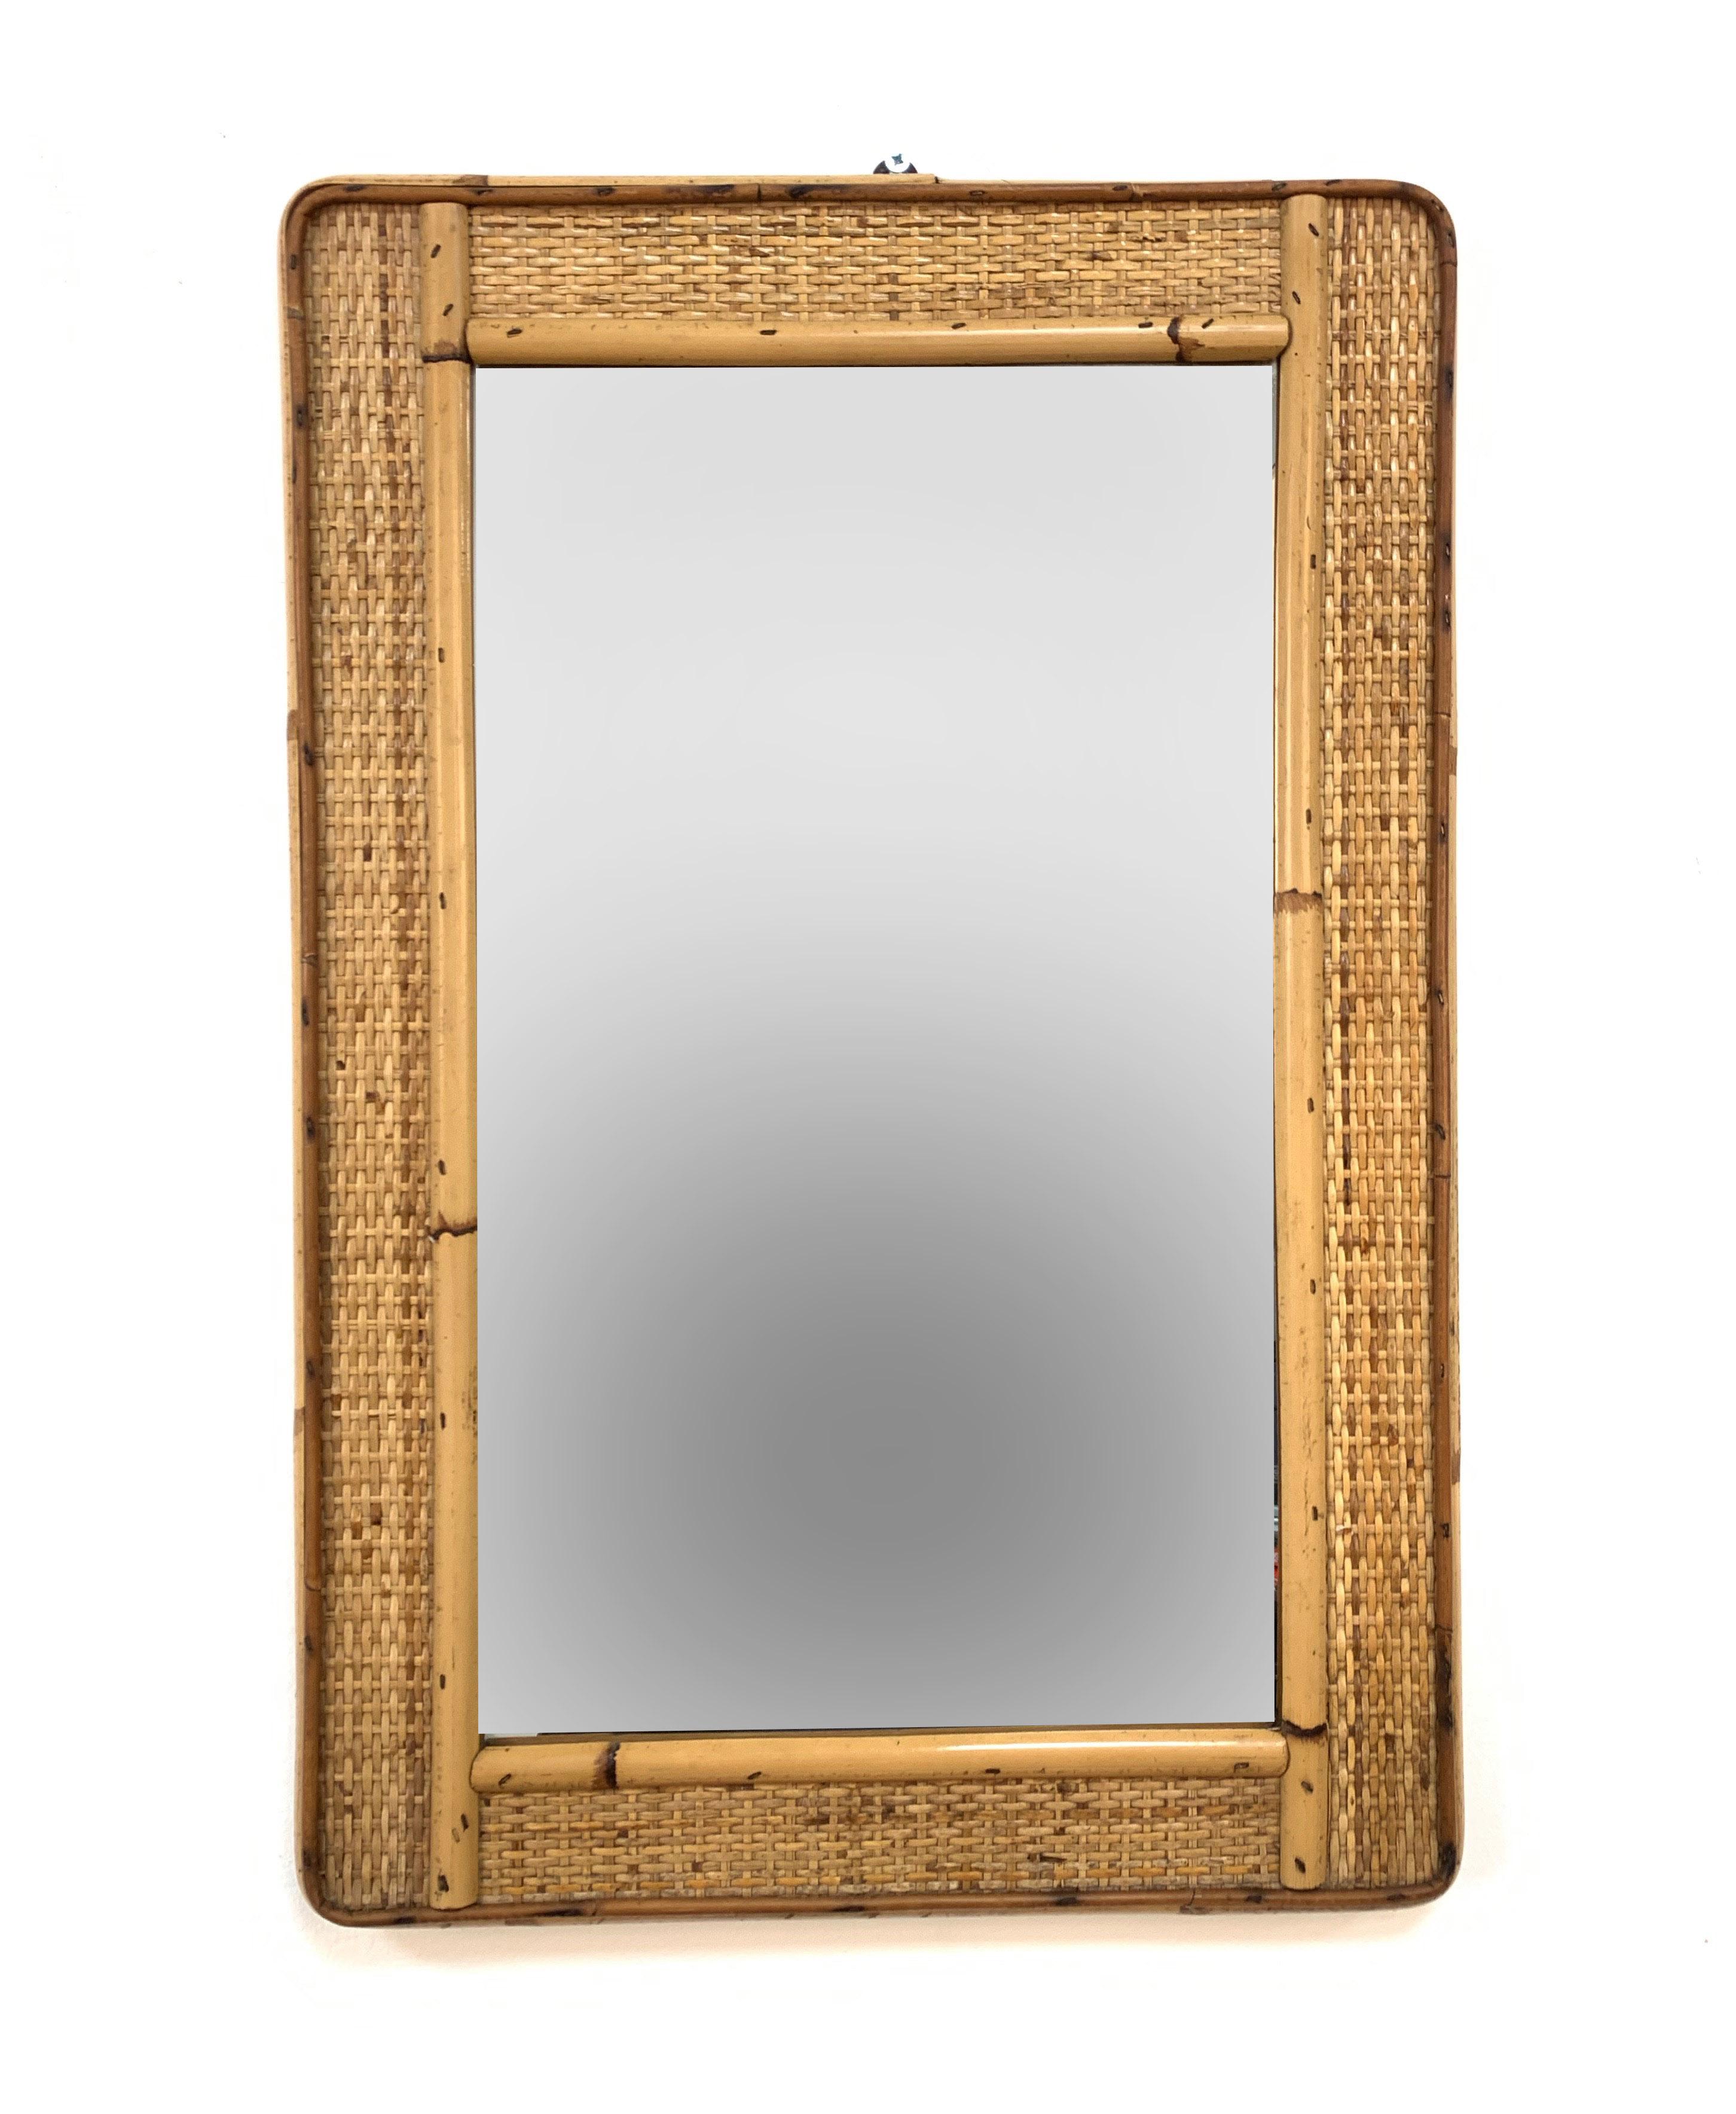 20th Century Rectangular Mirror with Bamboo Wicker Woven Frame from the 1970s, Italy For Sale